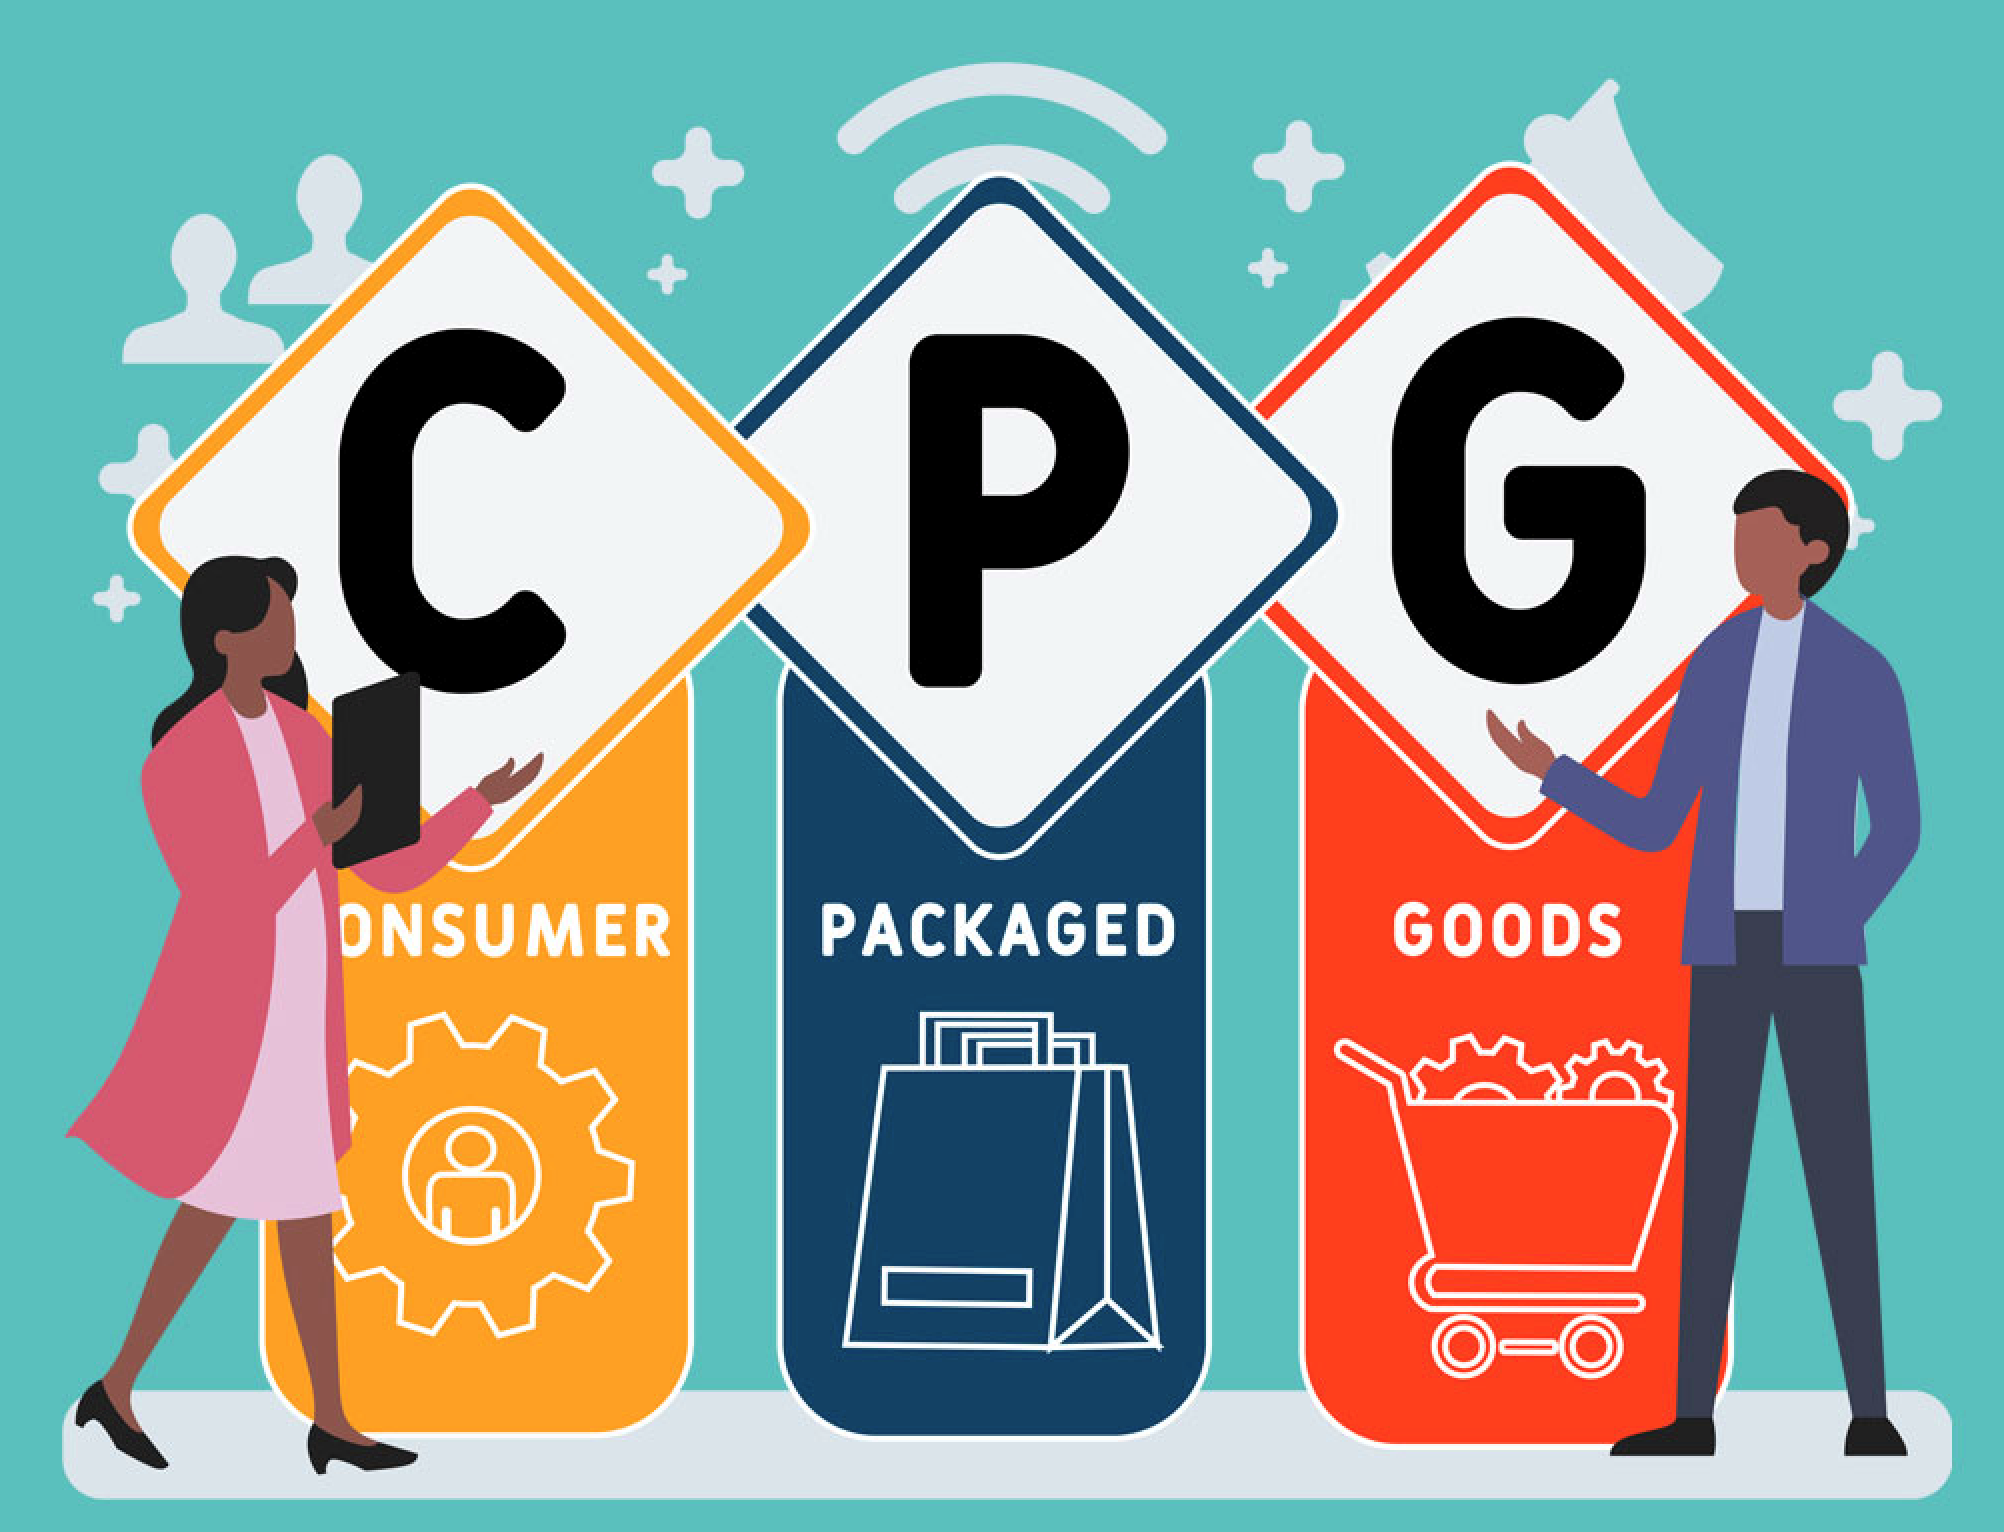 Mark Hauser, Private Equity Investor, Sees Value in the CPG Market